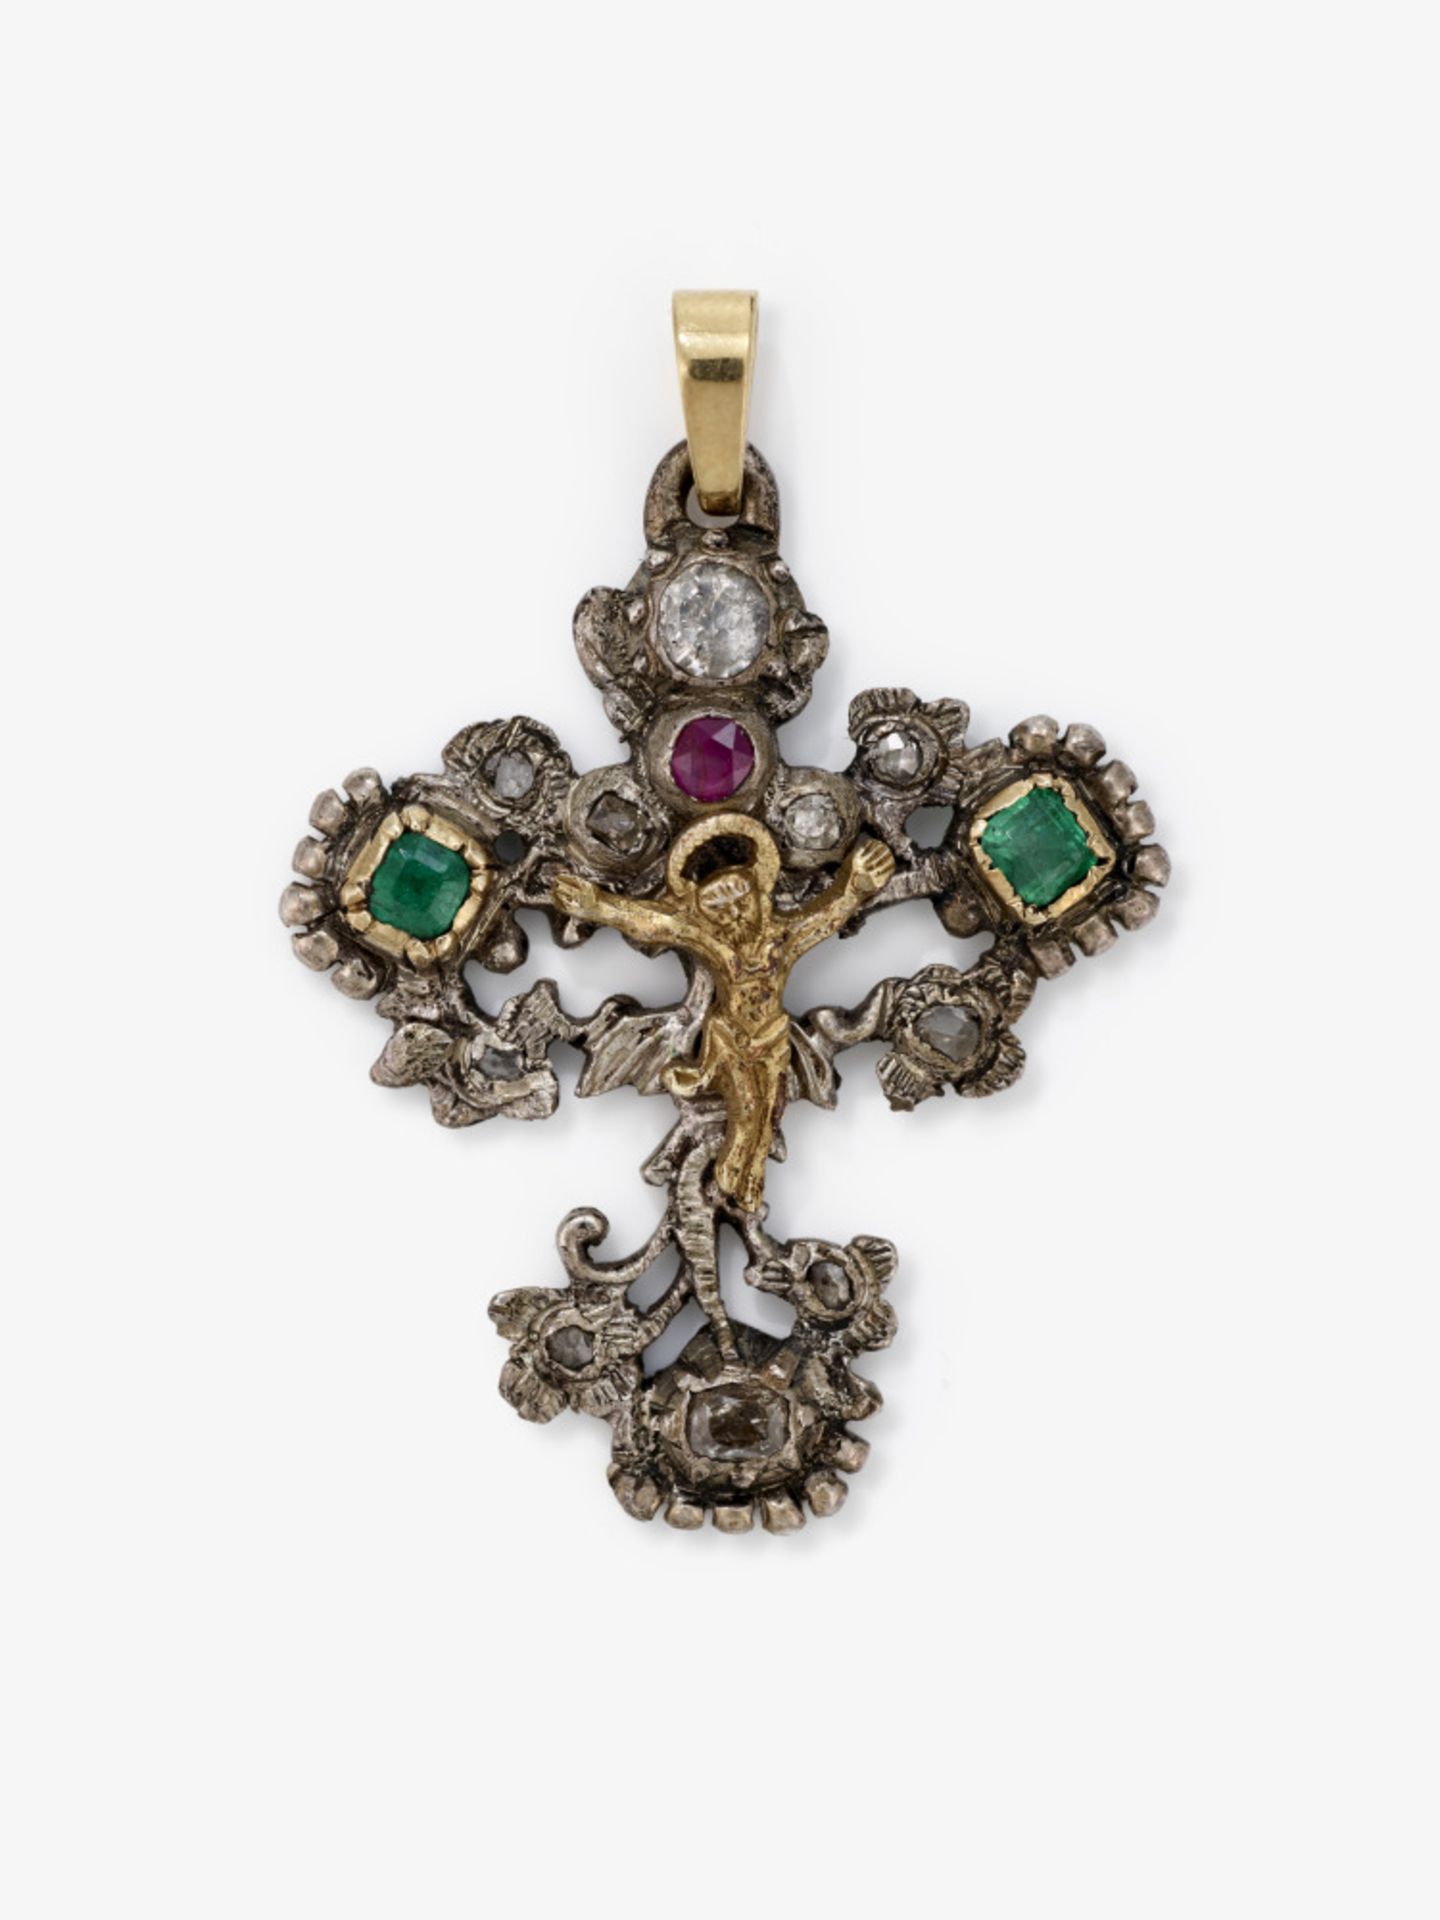 A rare cross pendant with the Body of Christ and flower tendrils - Probably Spain, circa 1740-1750